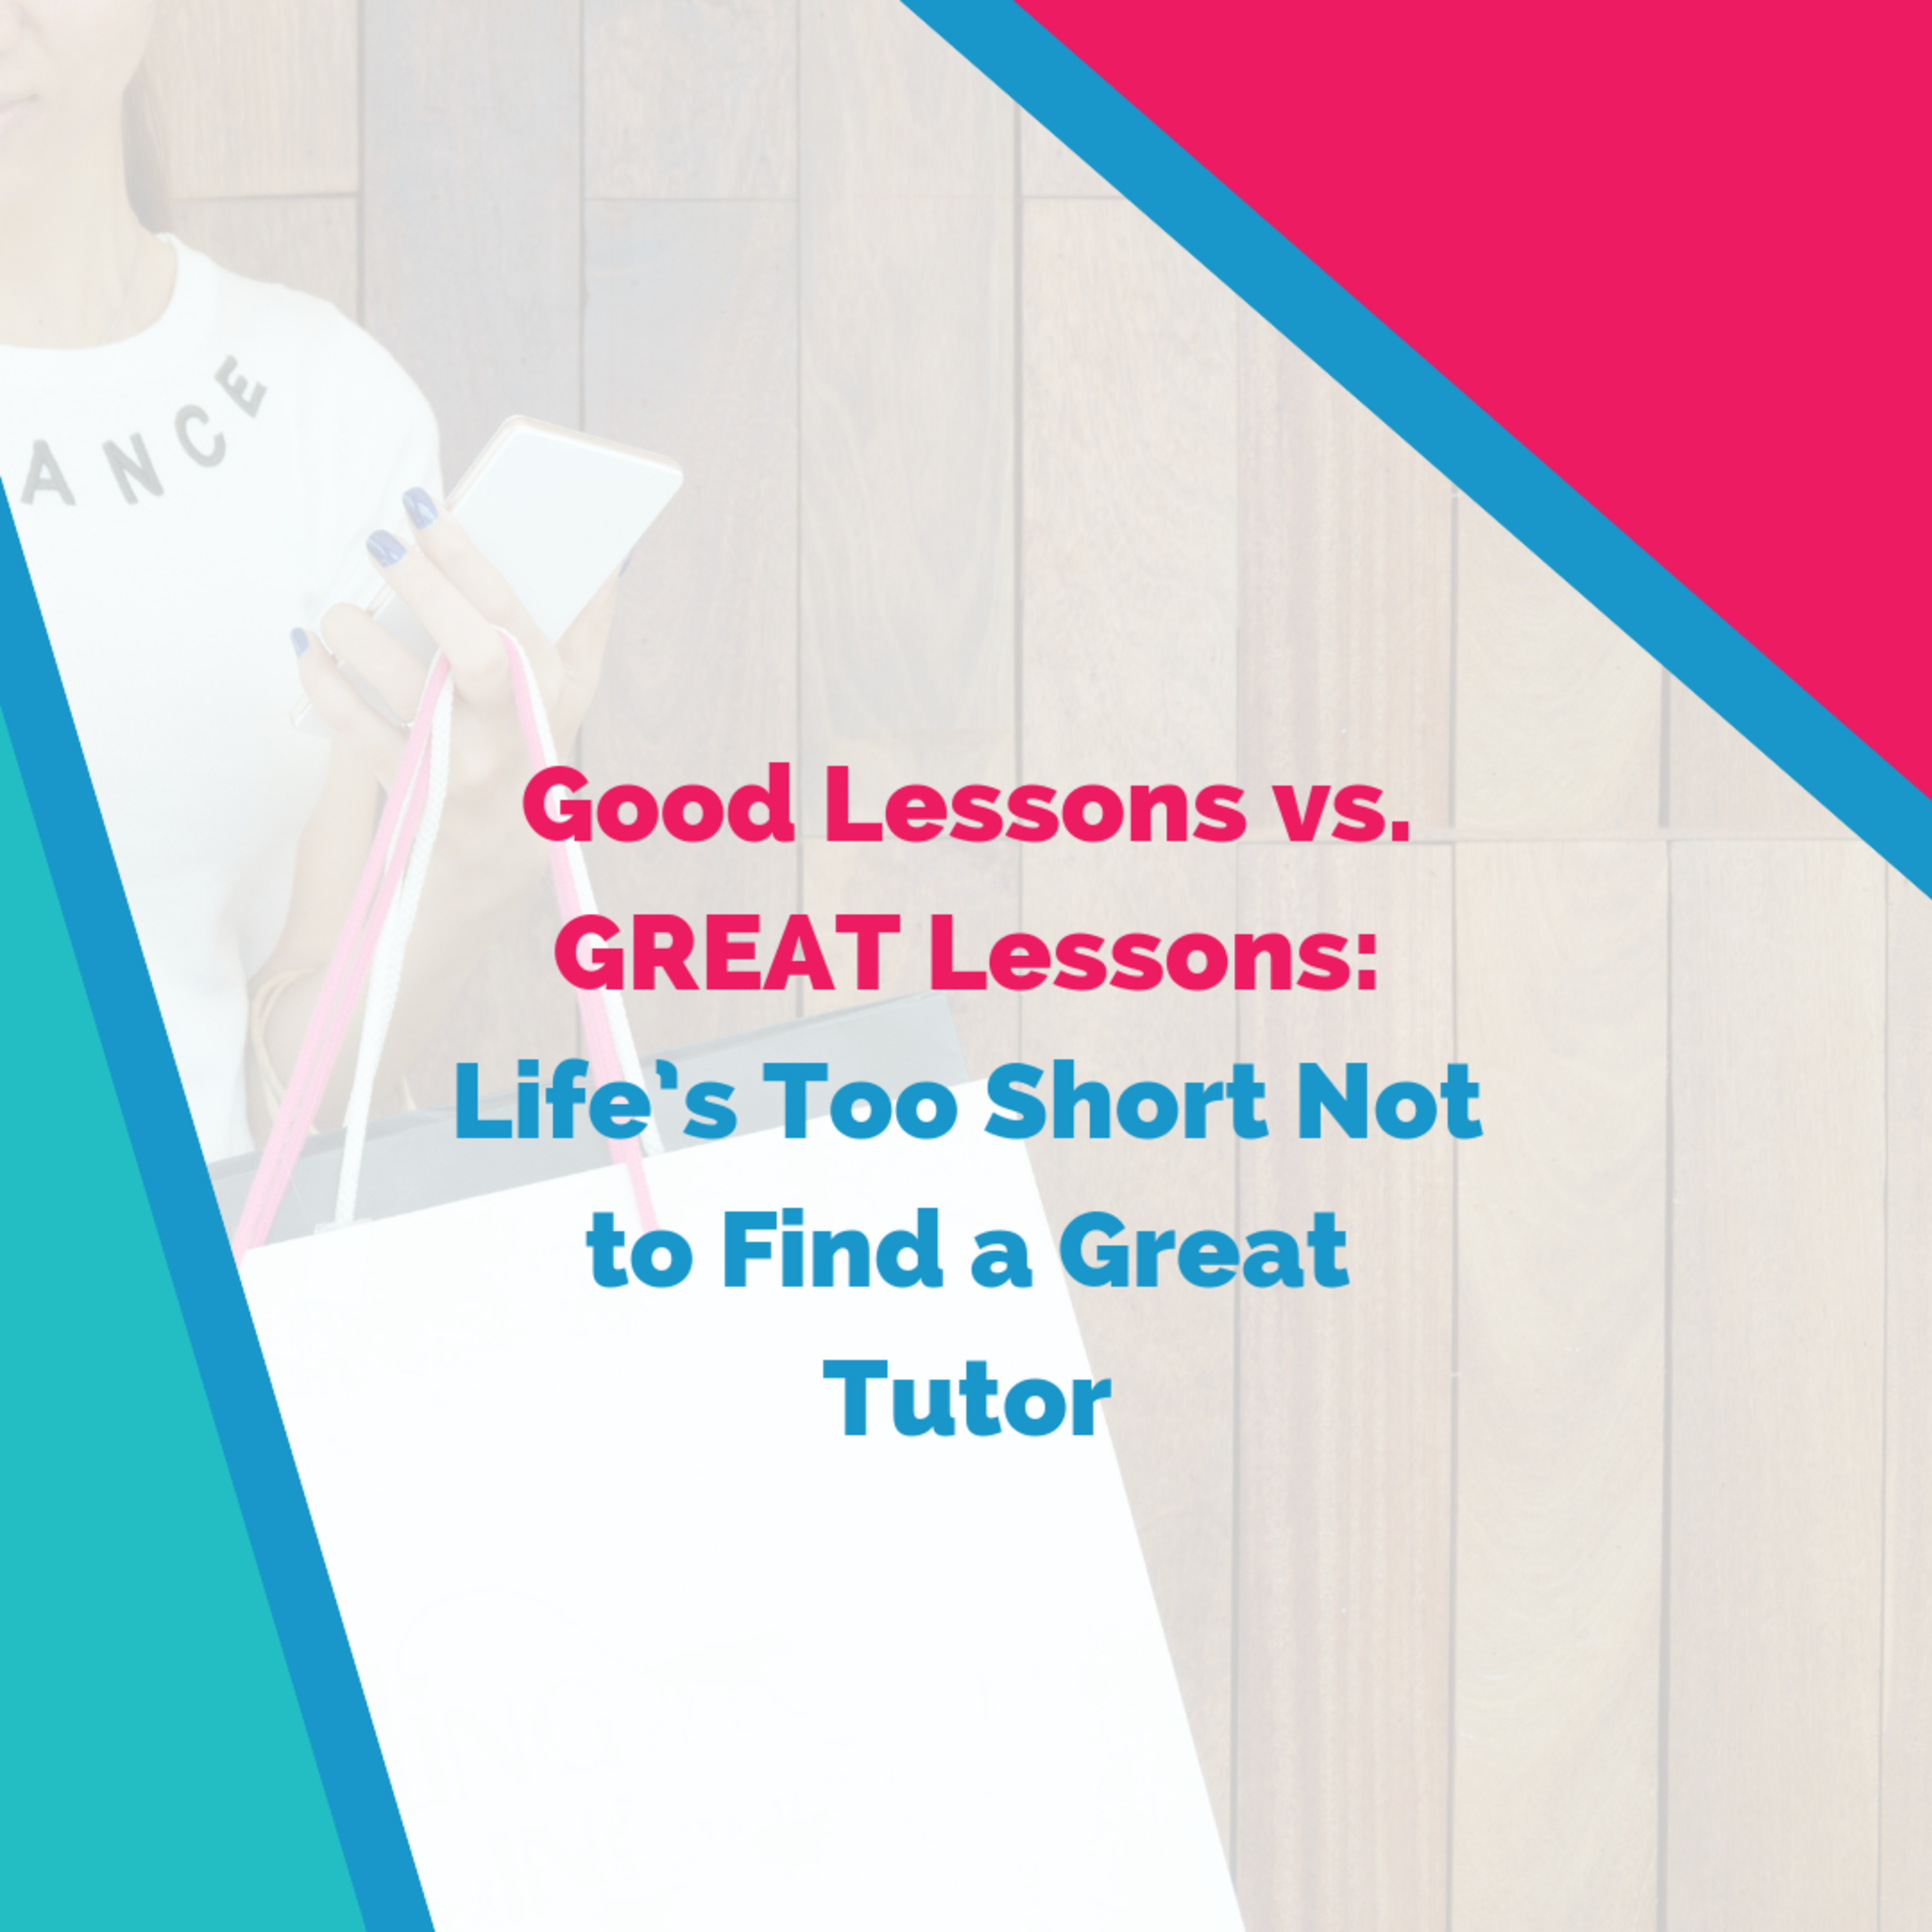 Good Lessons vs. GREAT Lessons: Life’s Too Short Not to Find a Great Tutor